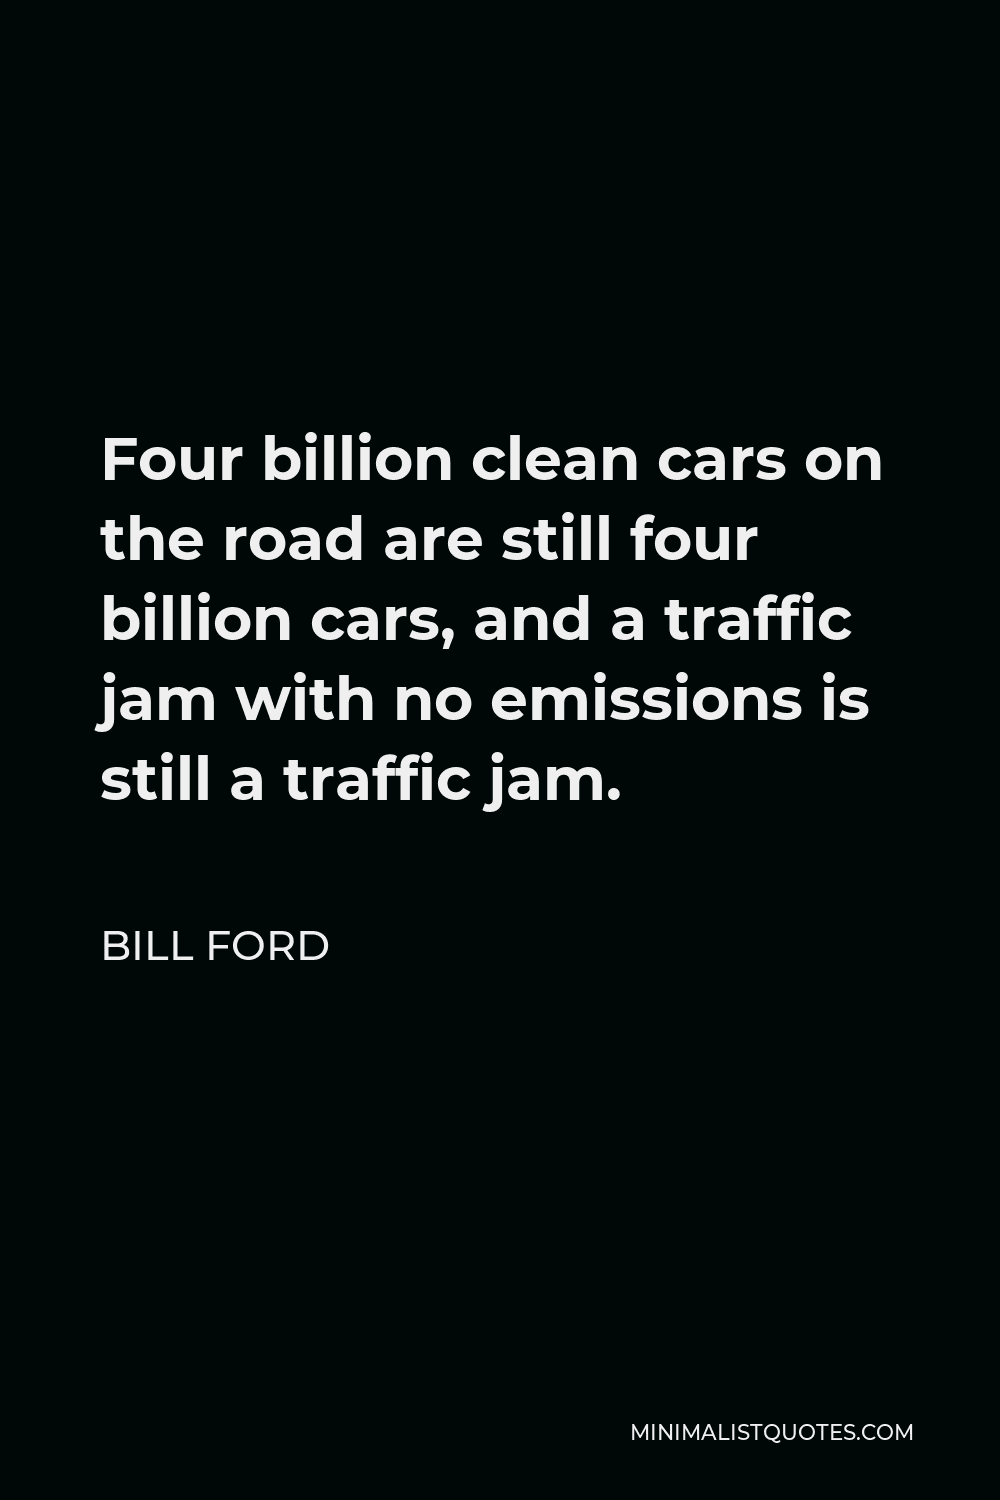 Bill Ford Quote - Four billion clean cars on the road are still four billion cars, and a traffic jam with no emissions is still a traffic jam.